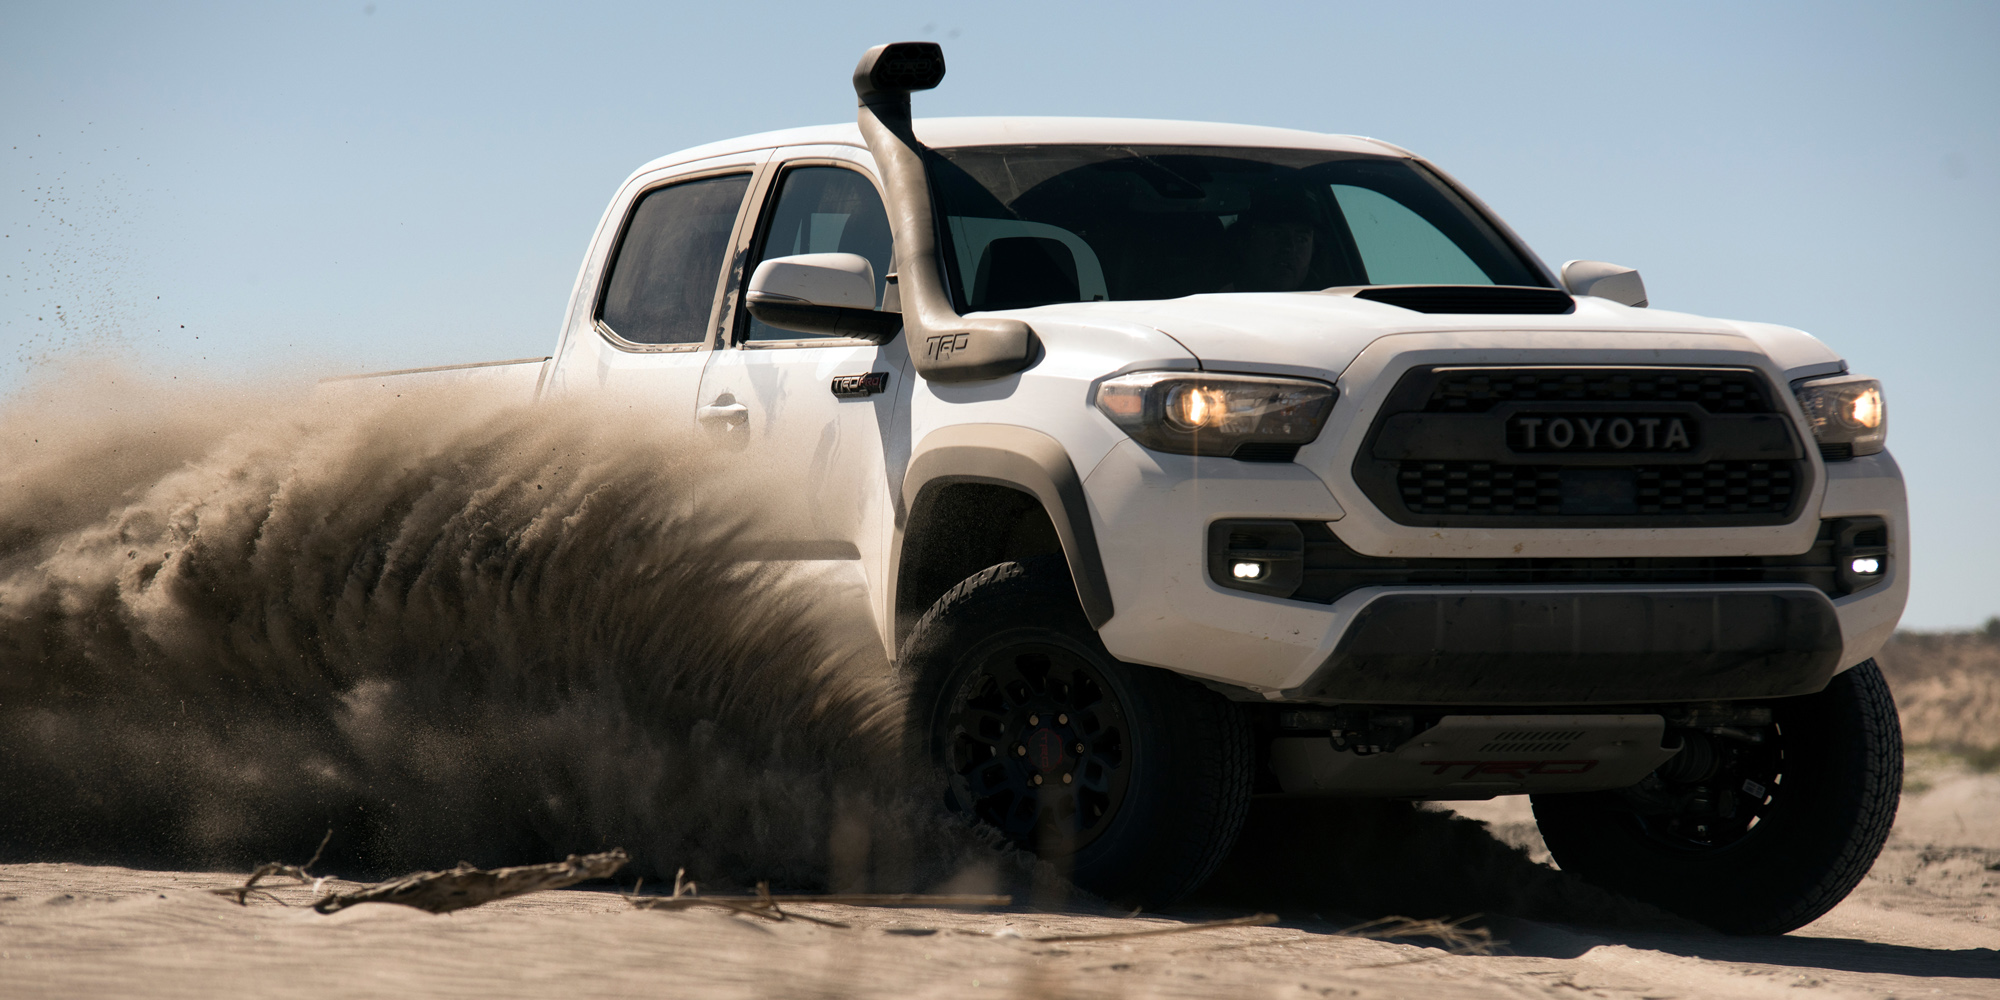 toyota elevates off road exploration with the TRD pro 